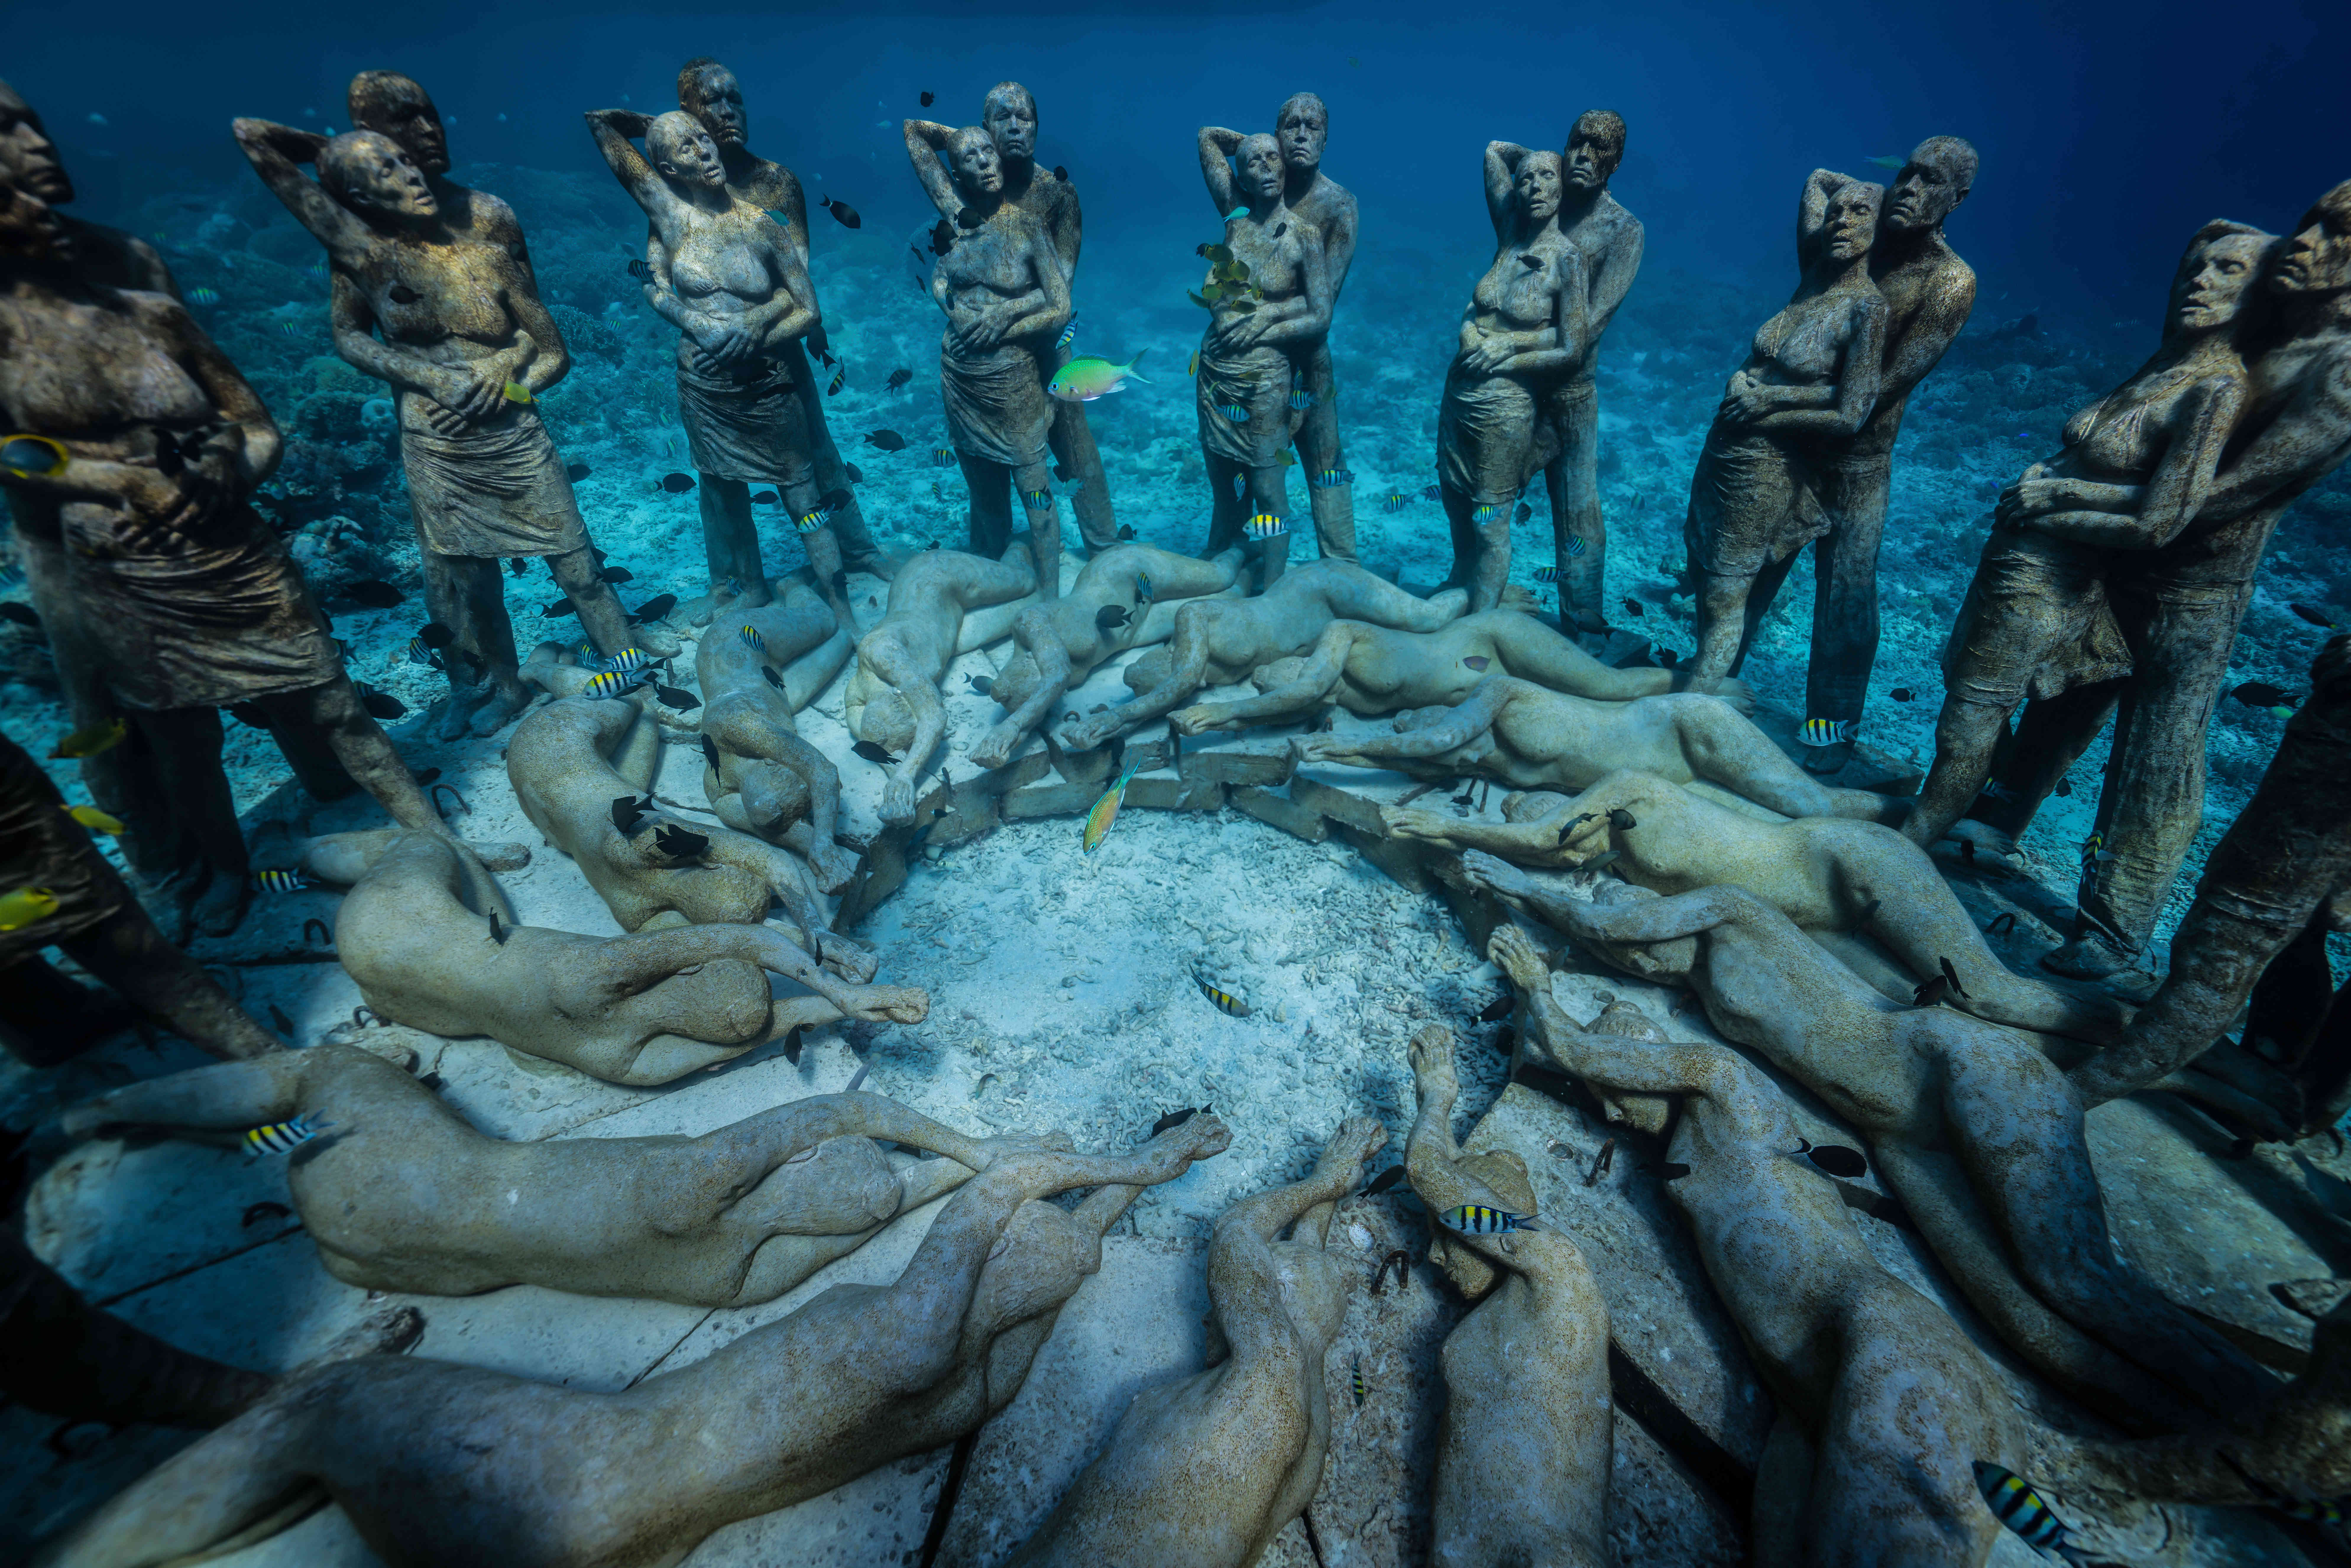 Dive in and explore this incredible underwater sculpture in Indonesia